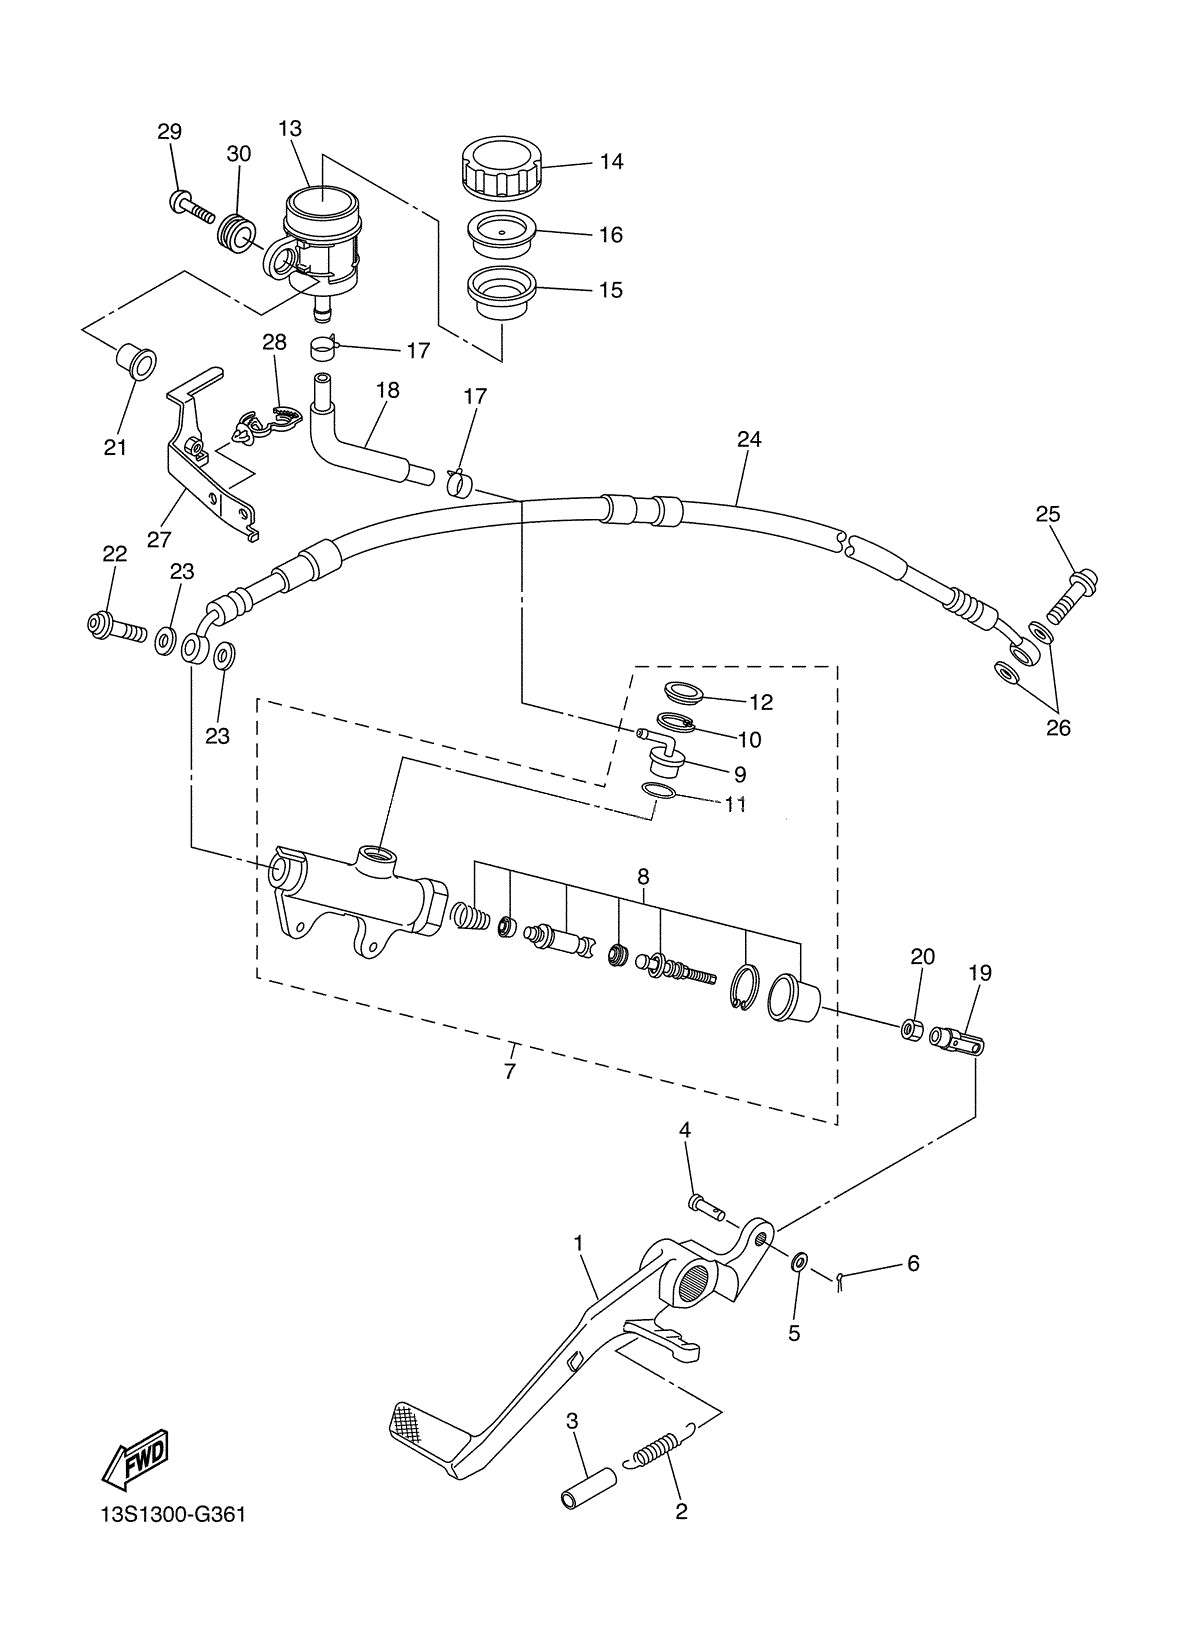 Steering and Suspension Diagram 2013 Yamaha Yzf R6 Yzfr6dcr Rear Master Cylinder Parts Best Oem Of Steering and Suspension Diagram